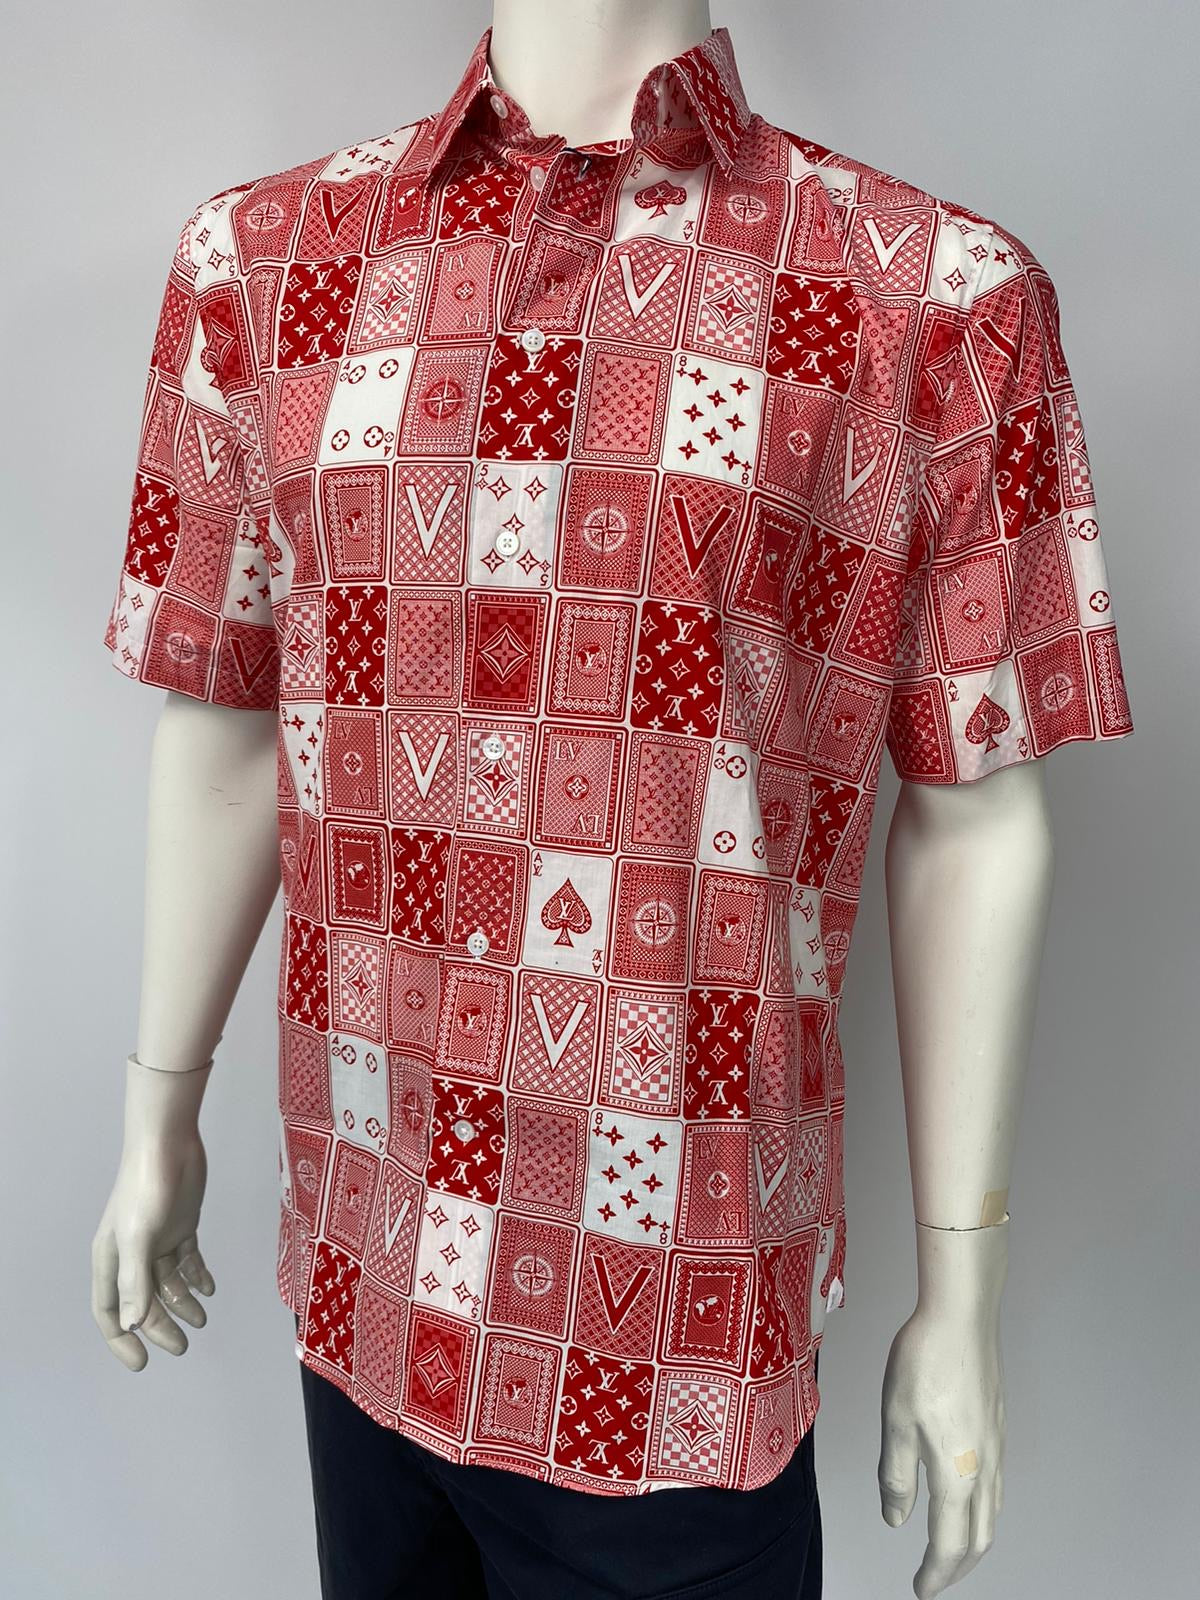 Louis Vuitton Men's Red and White Cotton Regular Fit Short Sleeve Card ...